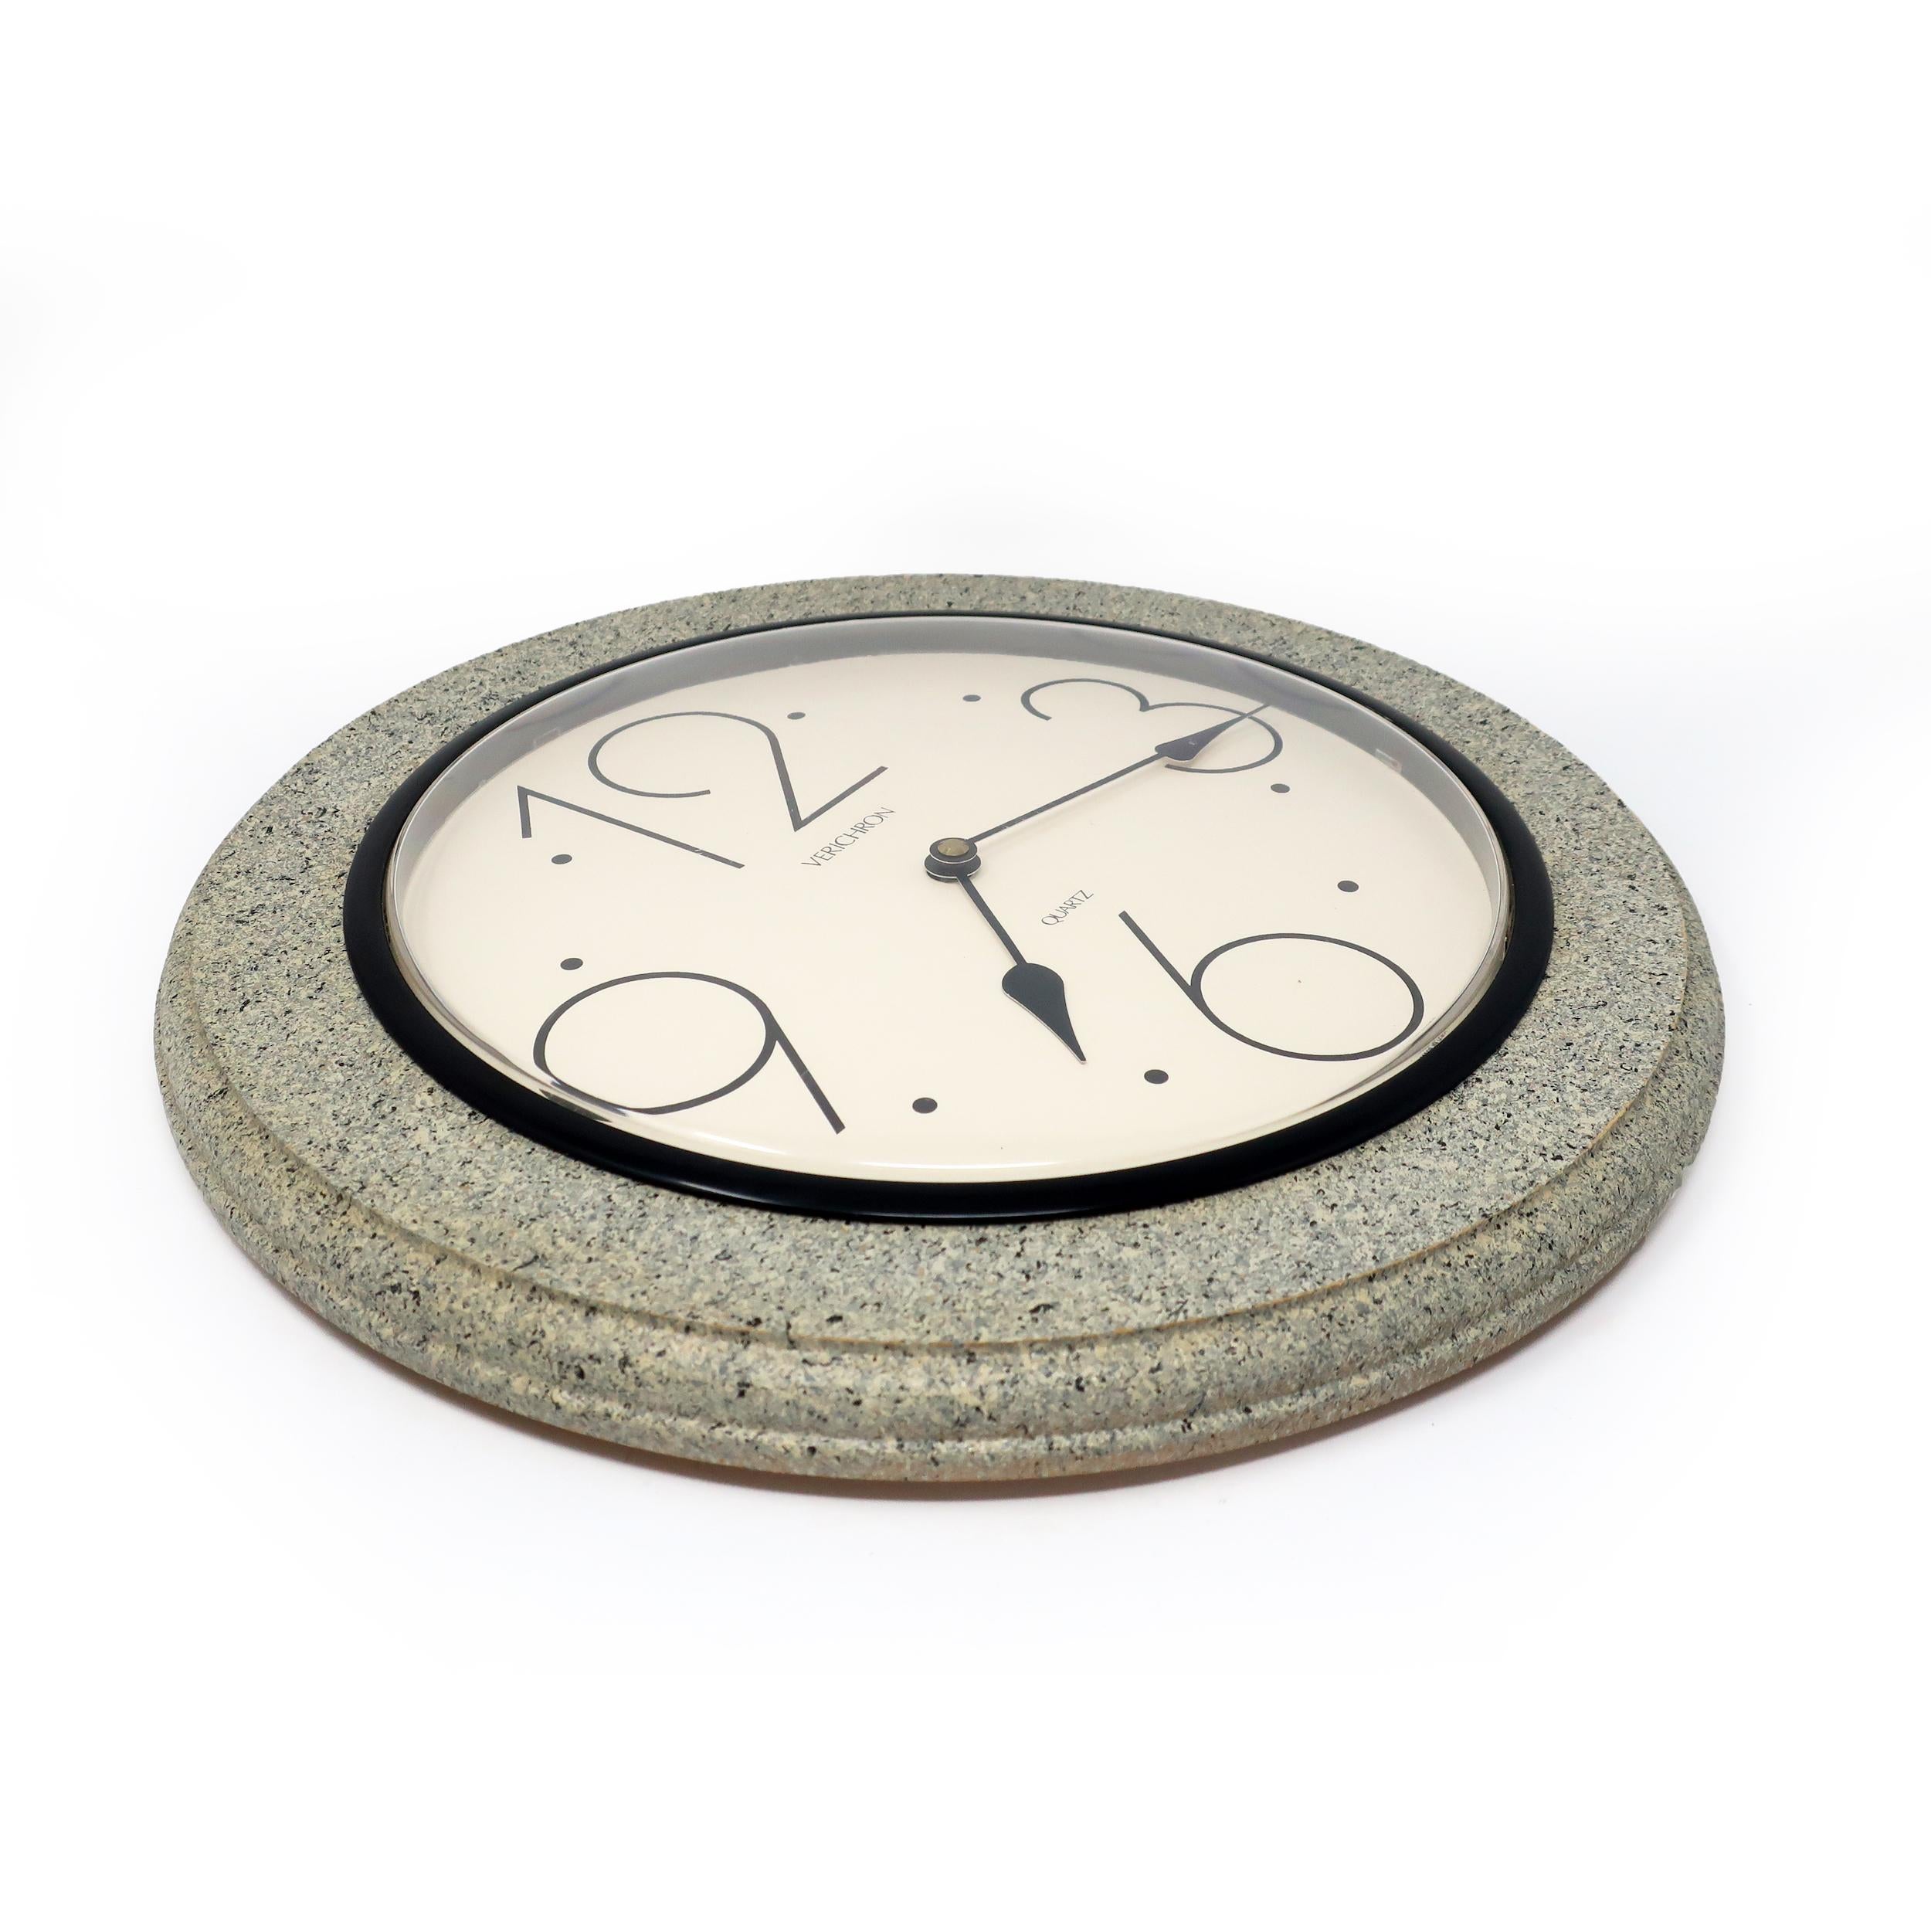 A vintage 1980s postmodern styled wall clock by Verichron. The clock's face is off white with large Art Deco-styled numbers and black hands. Surrounding the clock's face is a black ring and a gray and black speckled wood ring.

In good vintage